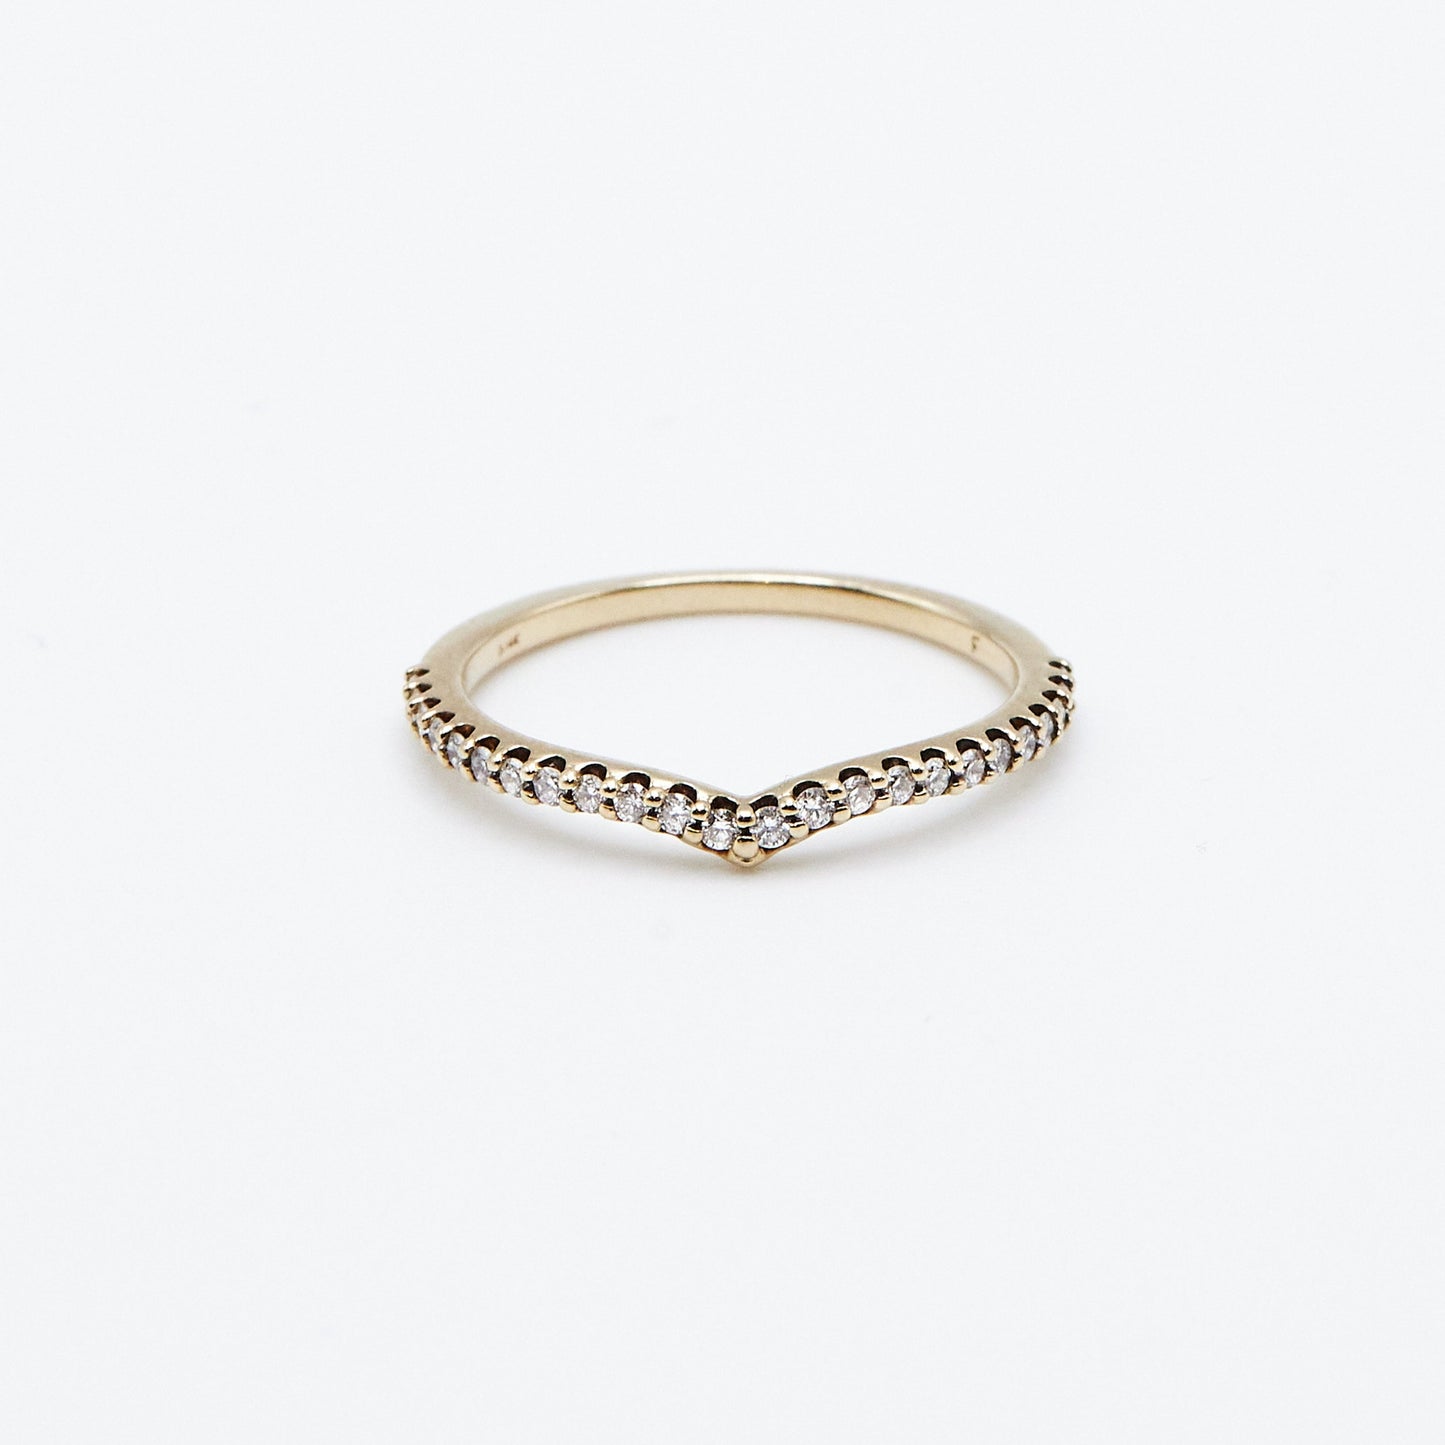 14k yellow gold white diamond band with subtle v curved shape